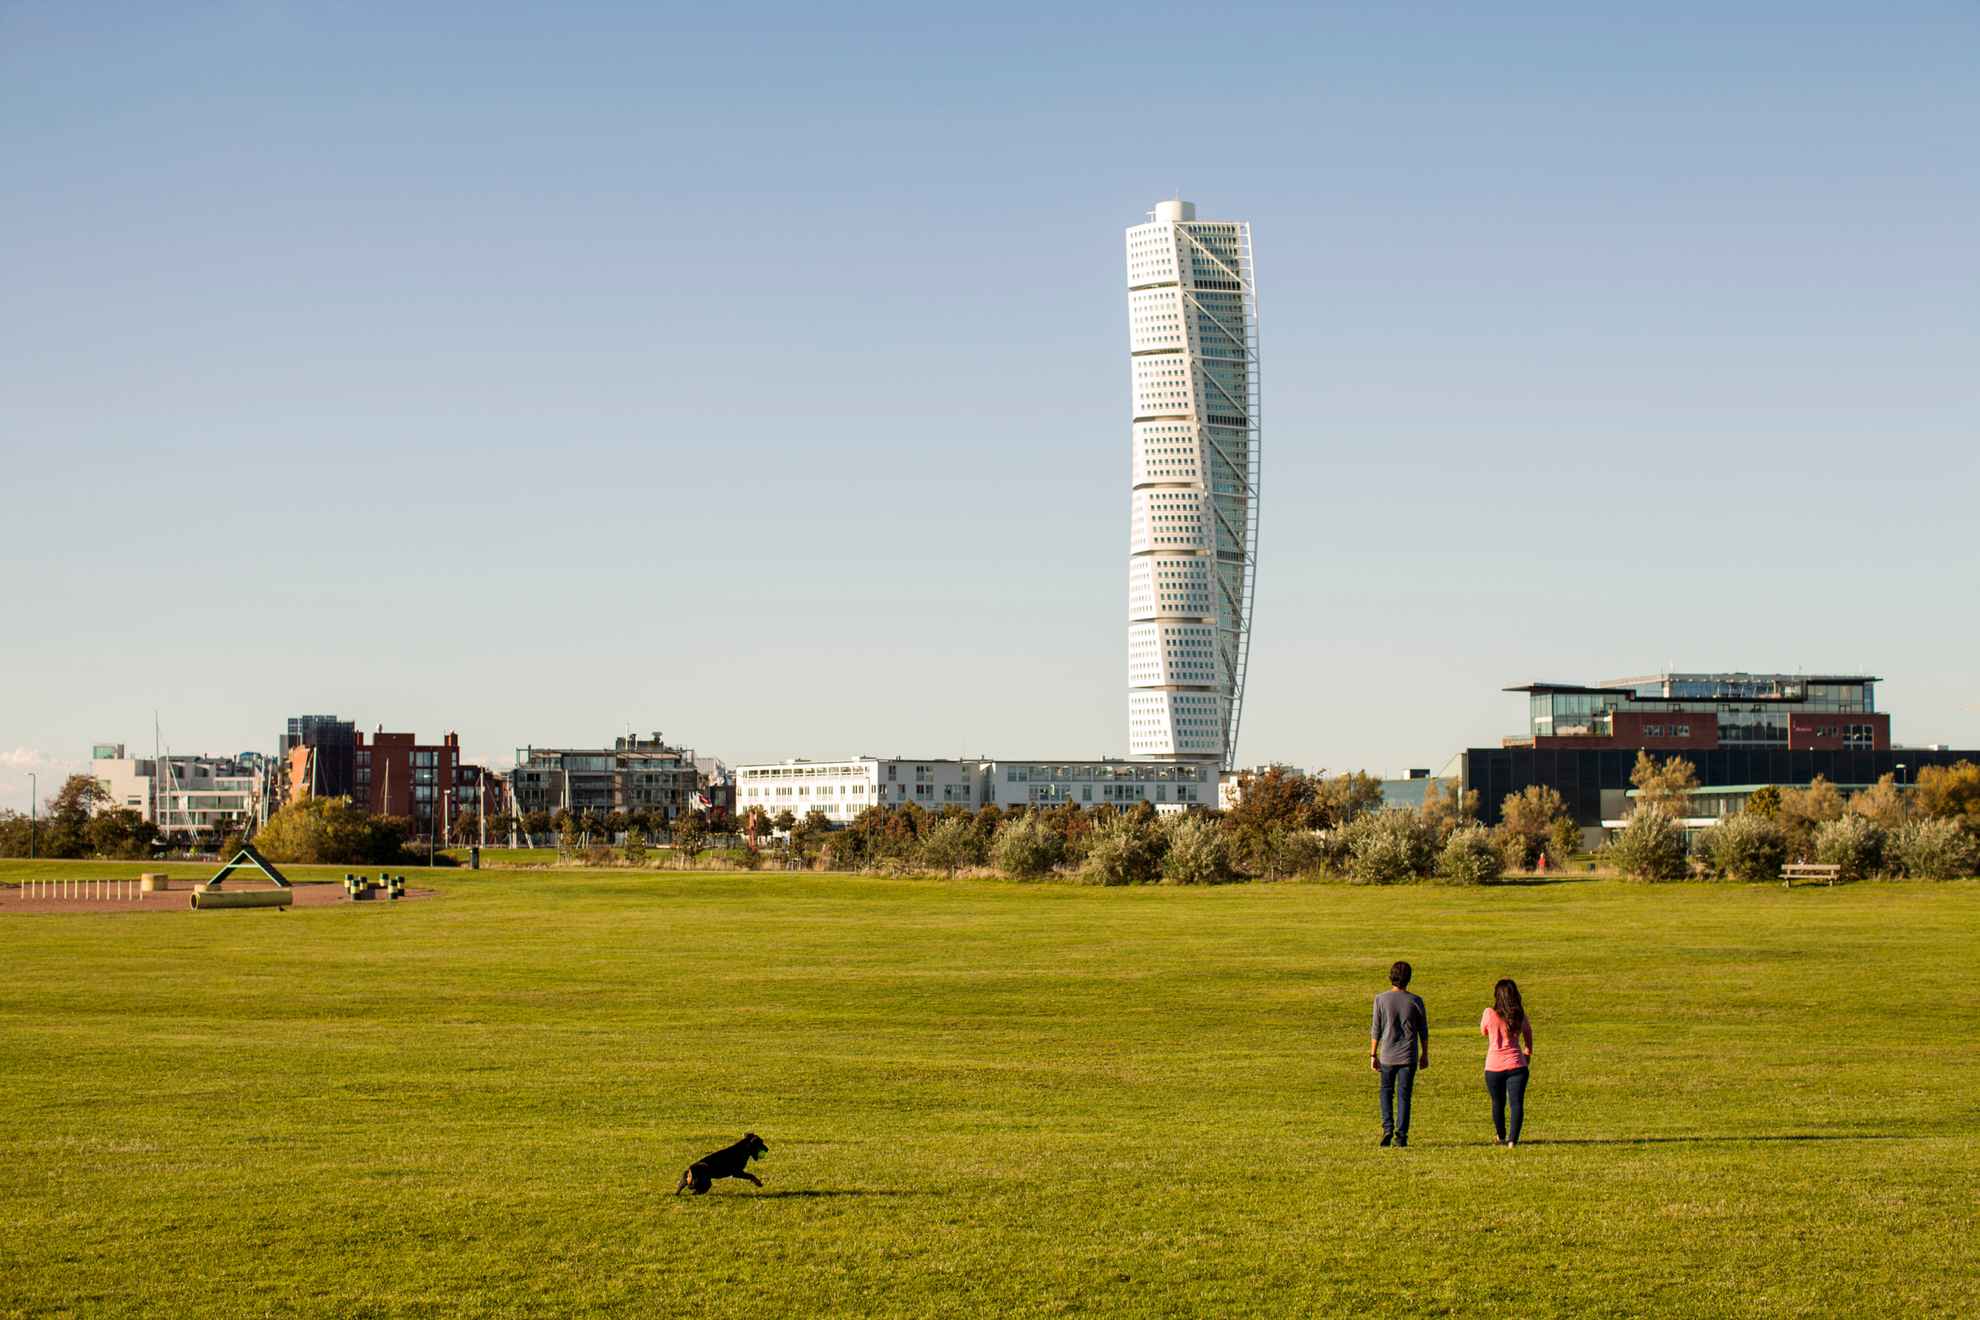 Two people are walking on a large field with their dog. The Turning Torso can be seen in the background.